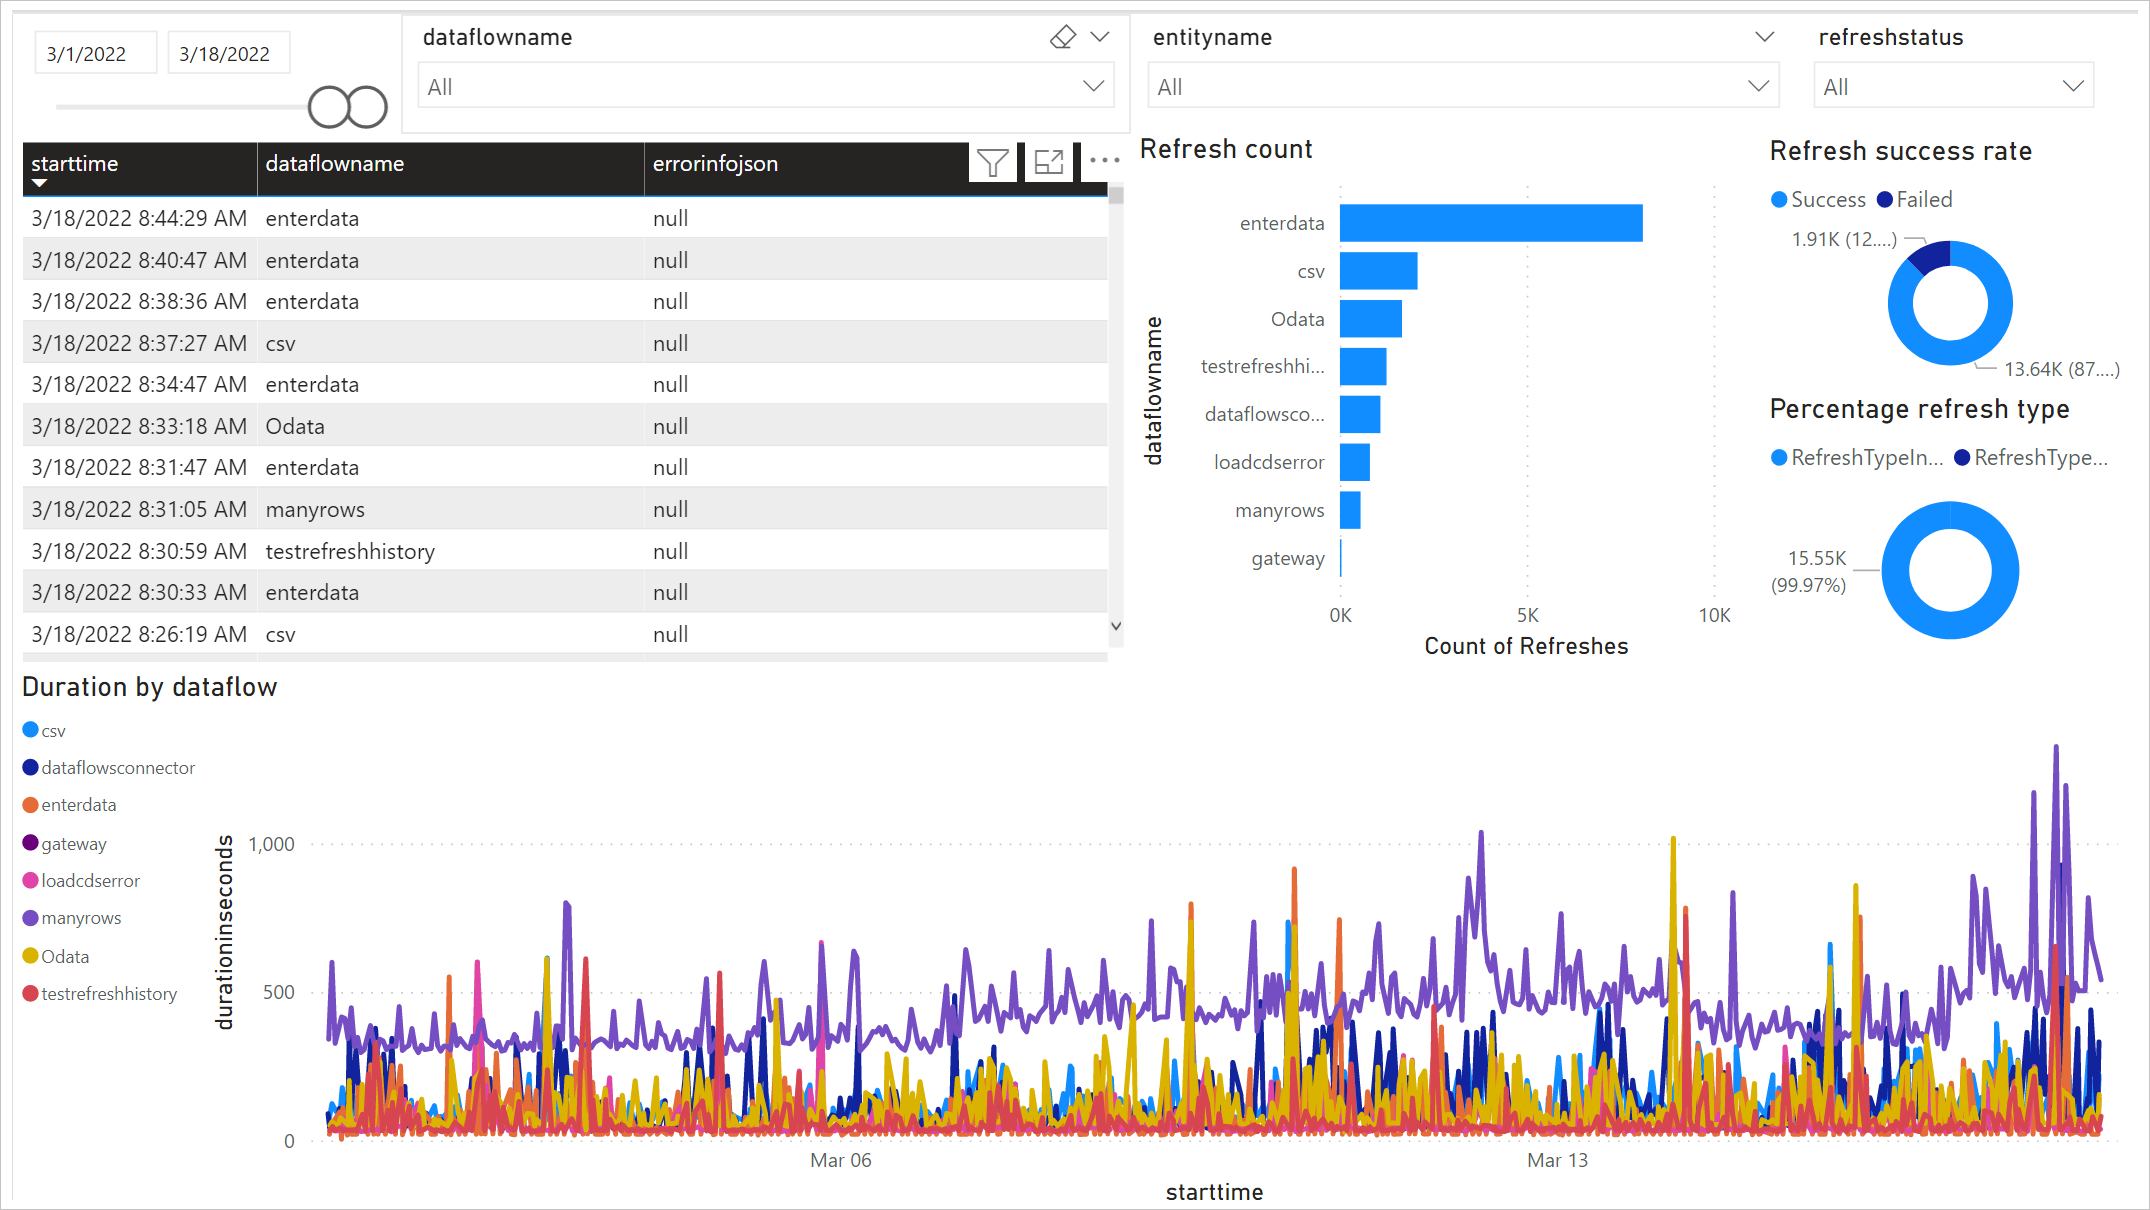 Image of the dashboard with dataflow duration, refresh count, and refresh success rate graphs.